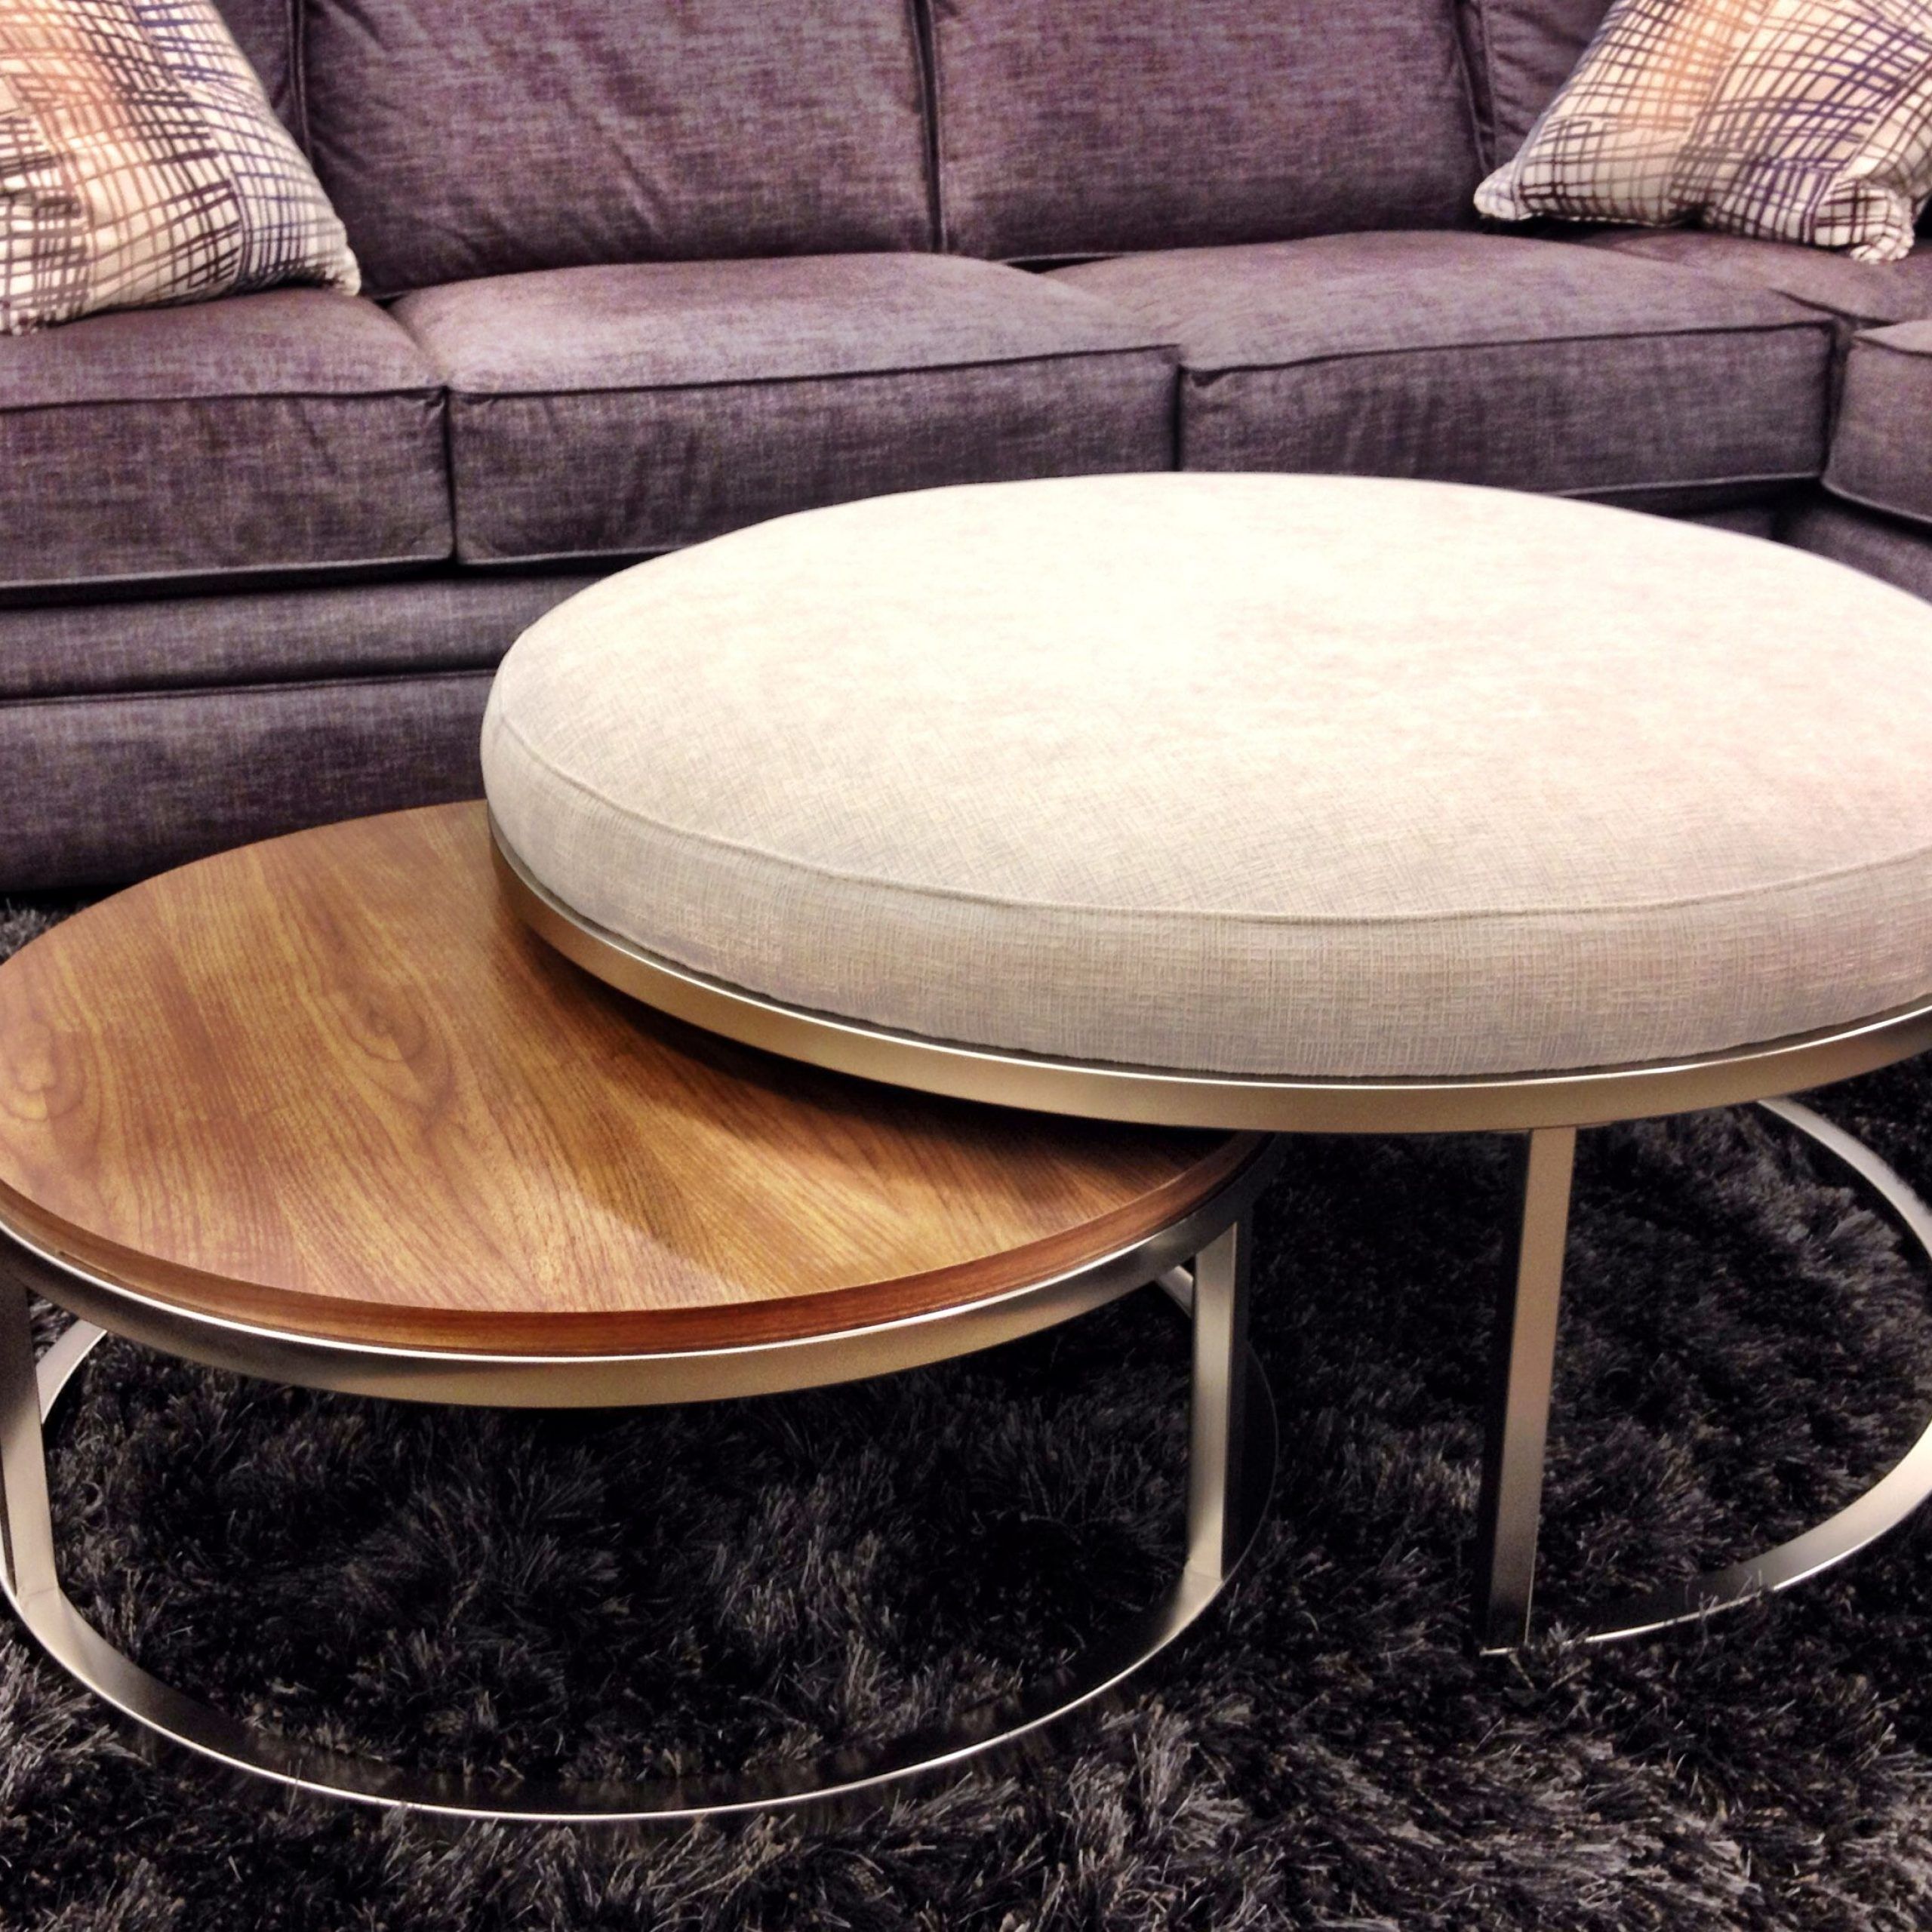 The Best Of Both Worlds Set Of 2 Nesting Coffee Table & Ottoman (View 10 of 15)